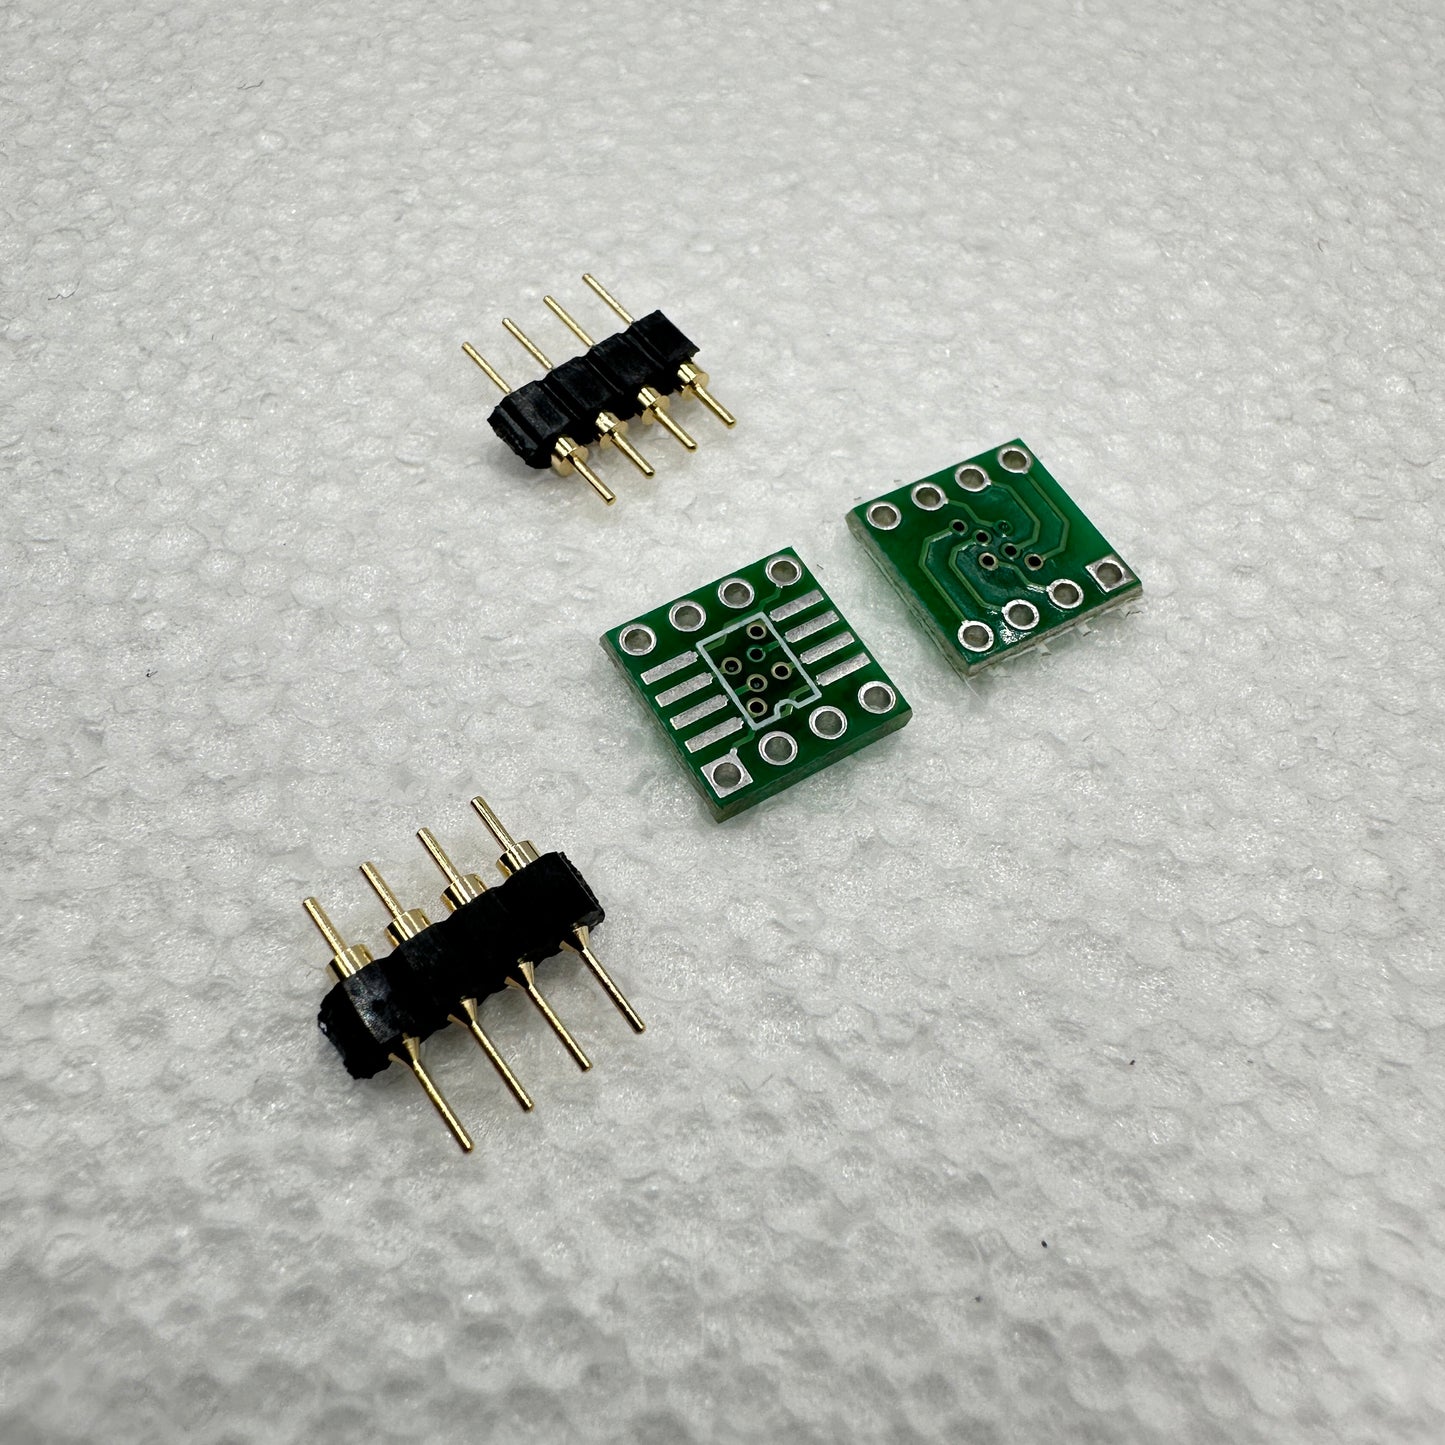 SOIC8 to DIP8 Dual Single Op-Amp Adapter with Gold Headers